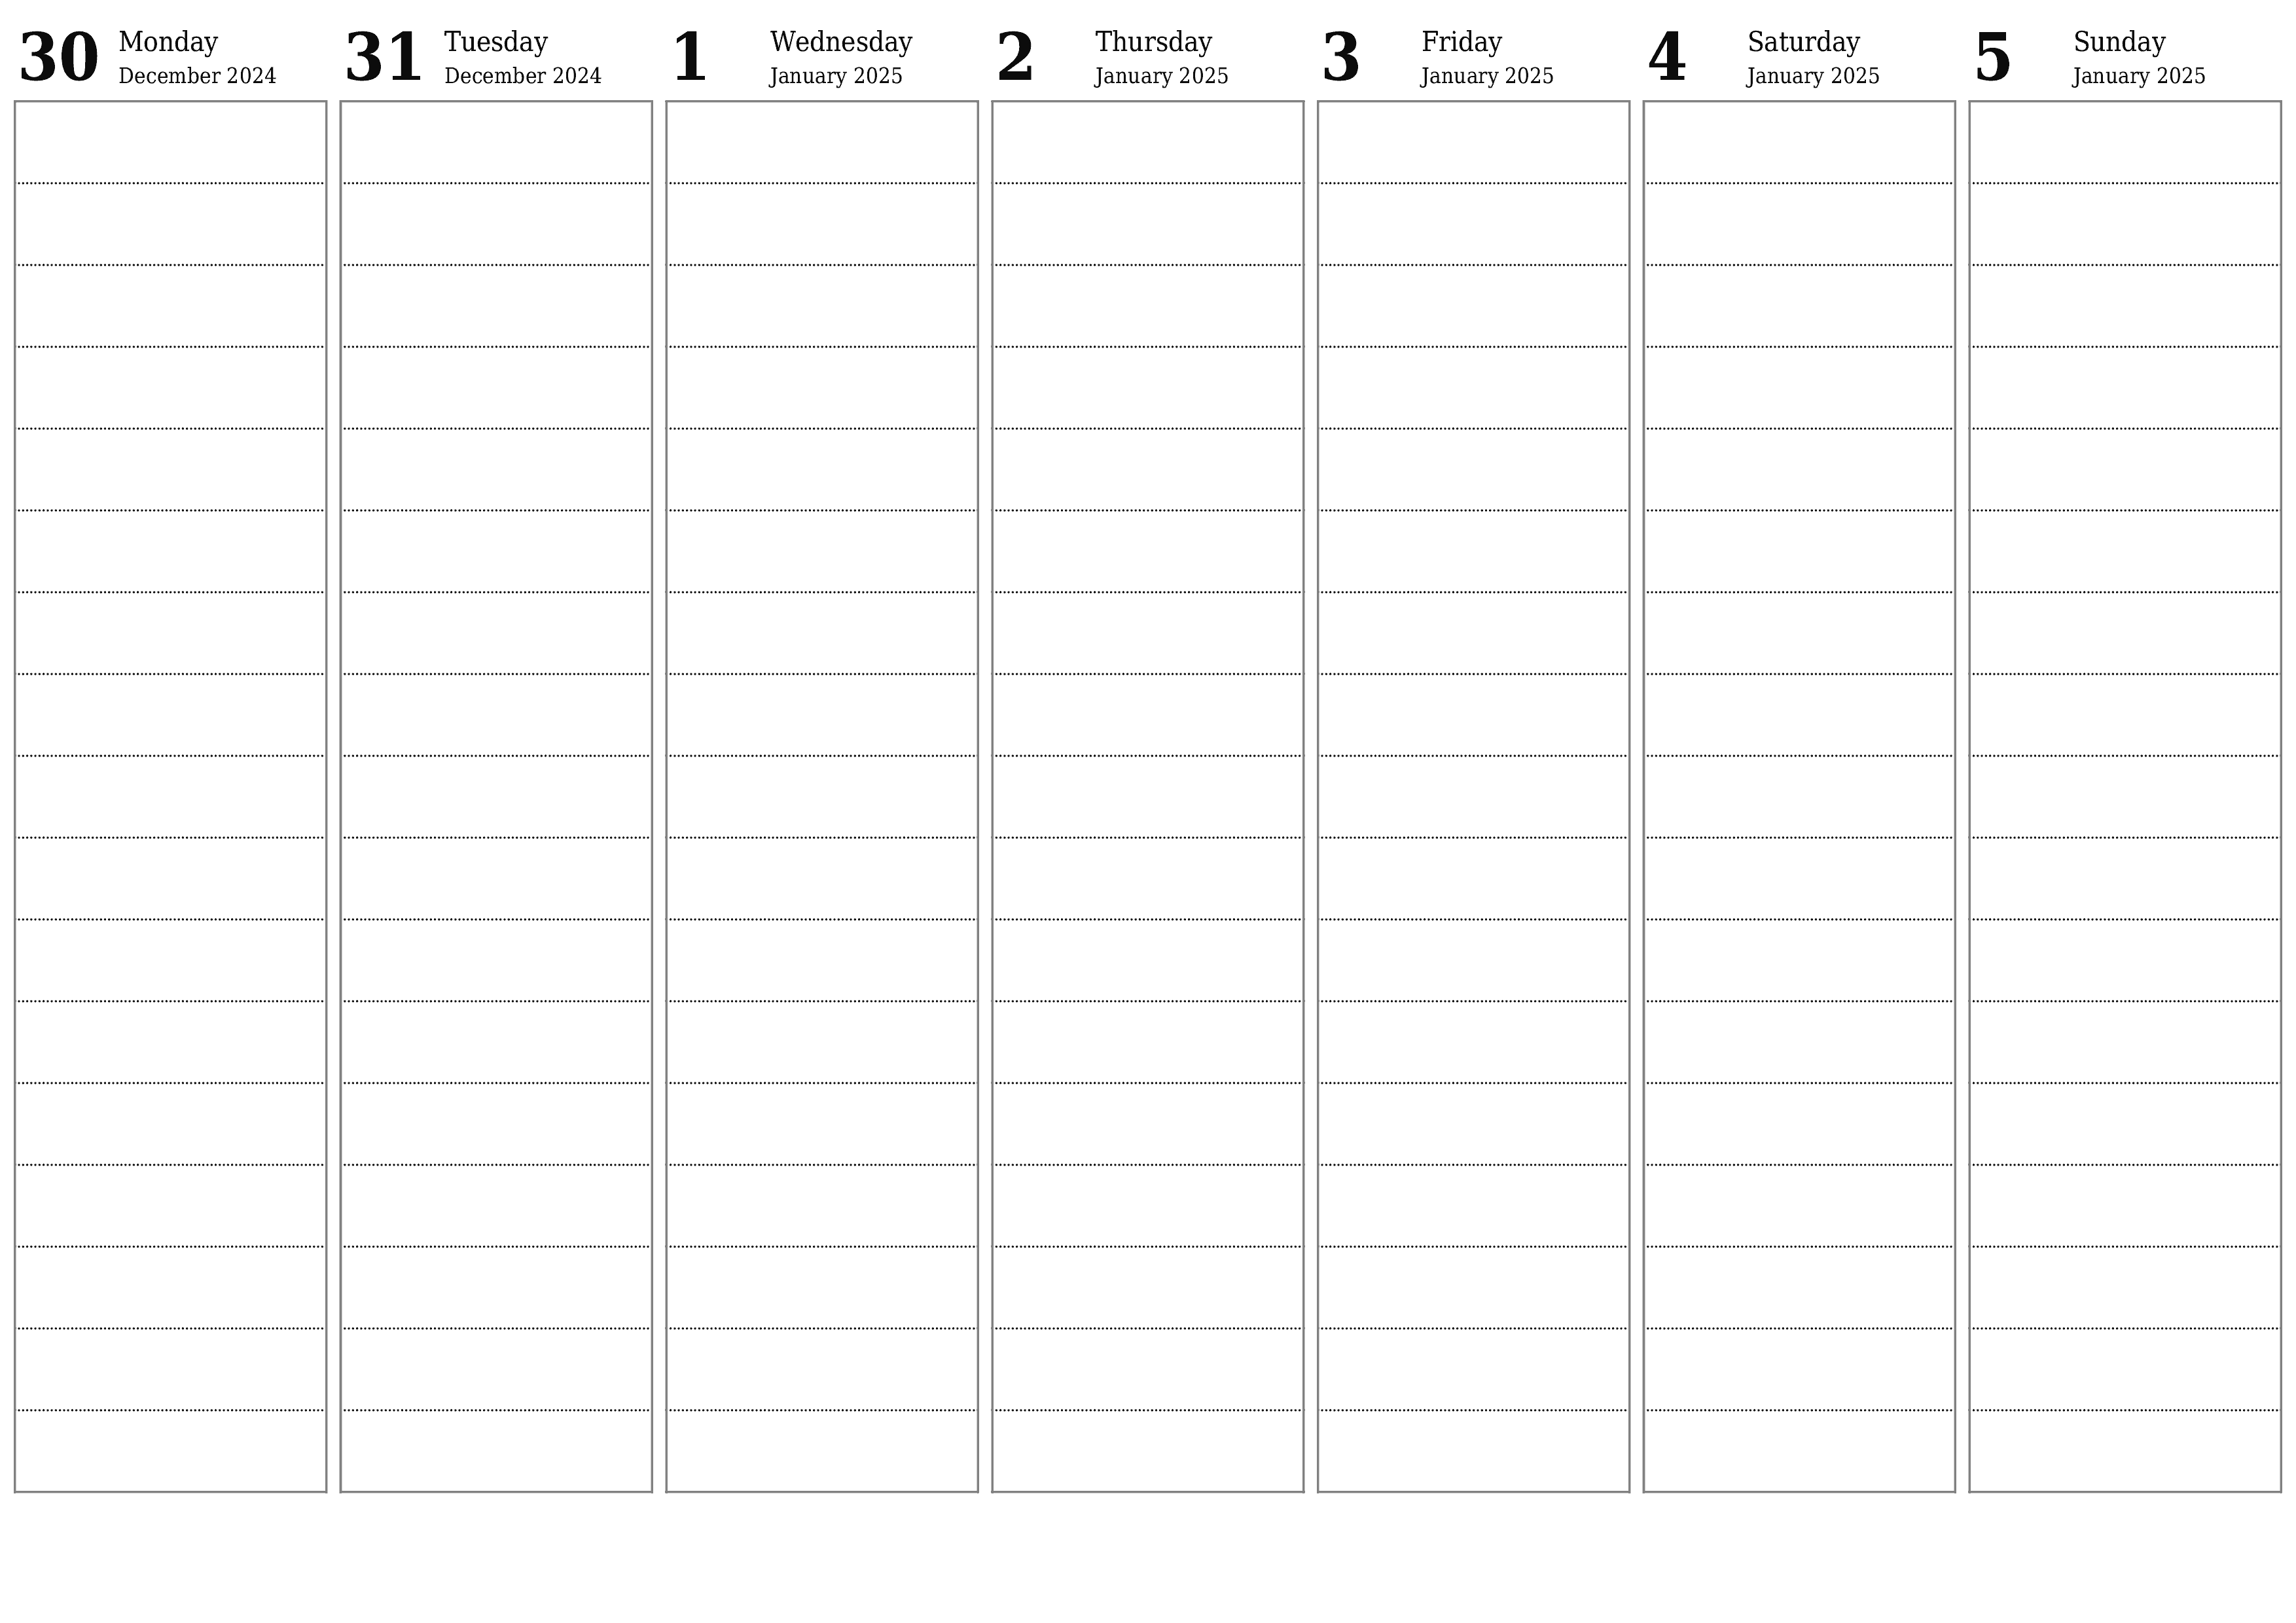 Blank weekly printable calendar and planner for week January 2025 with notes, save and print to PDF PNG English